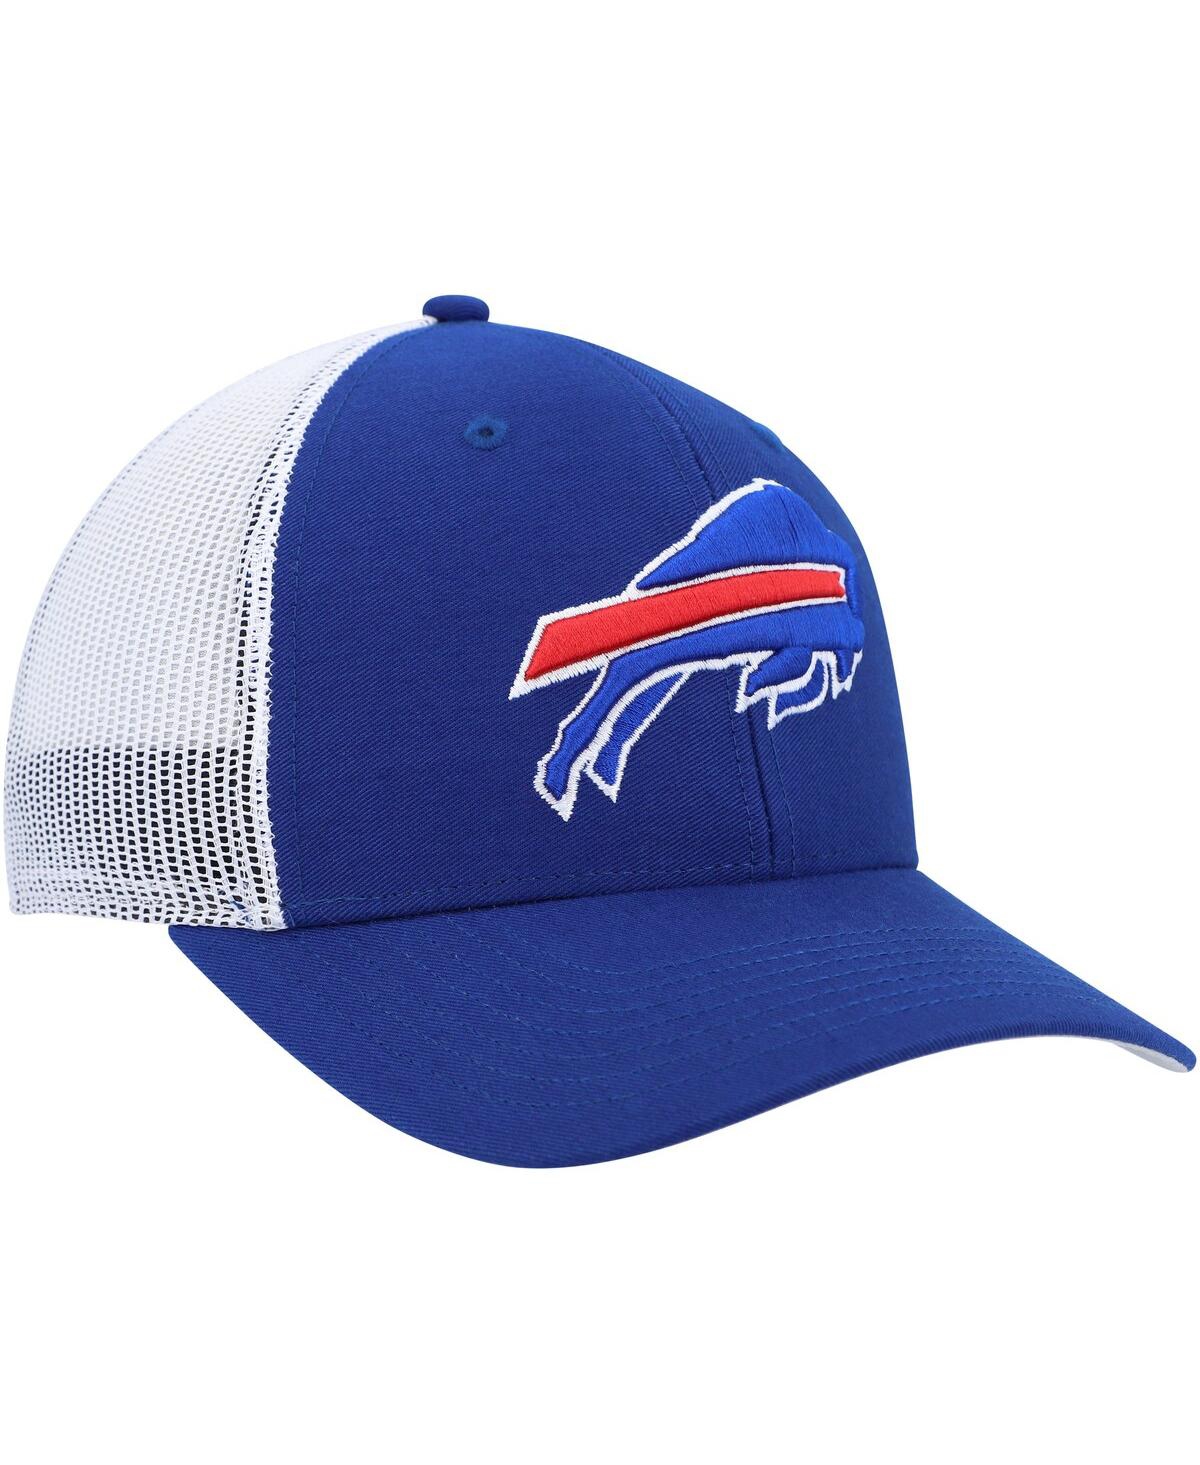 Shop 47 Brand Youth Boys And Girls ' Royal, White Buffalo Bills Adjustable Trucker Hat In Royal,white